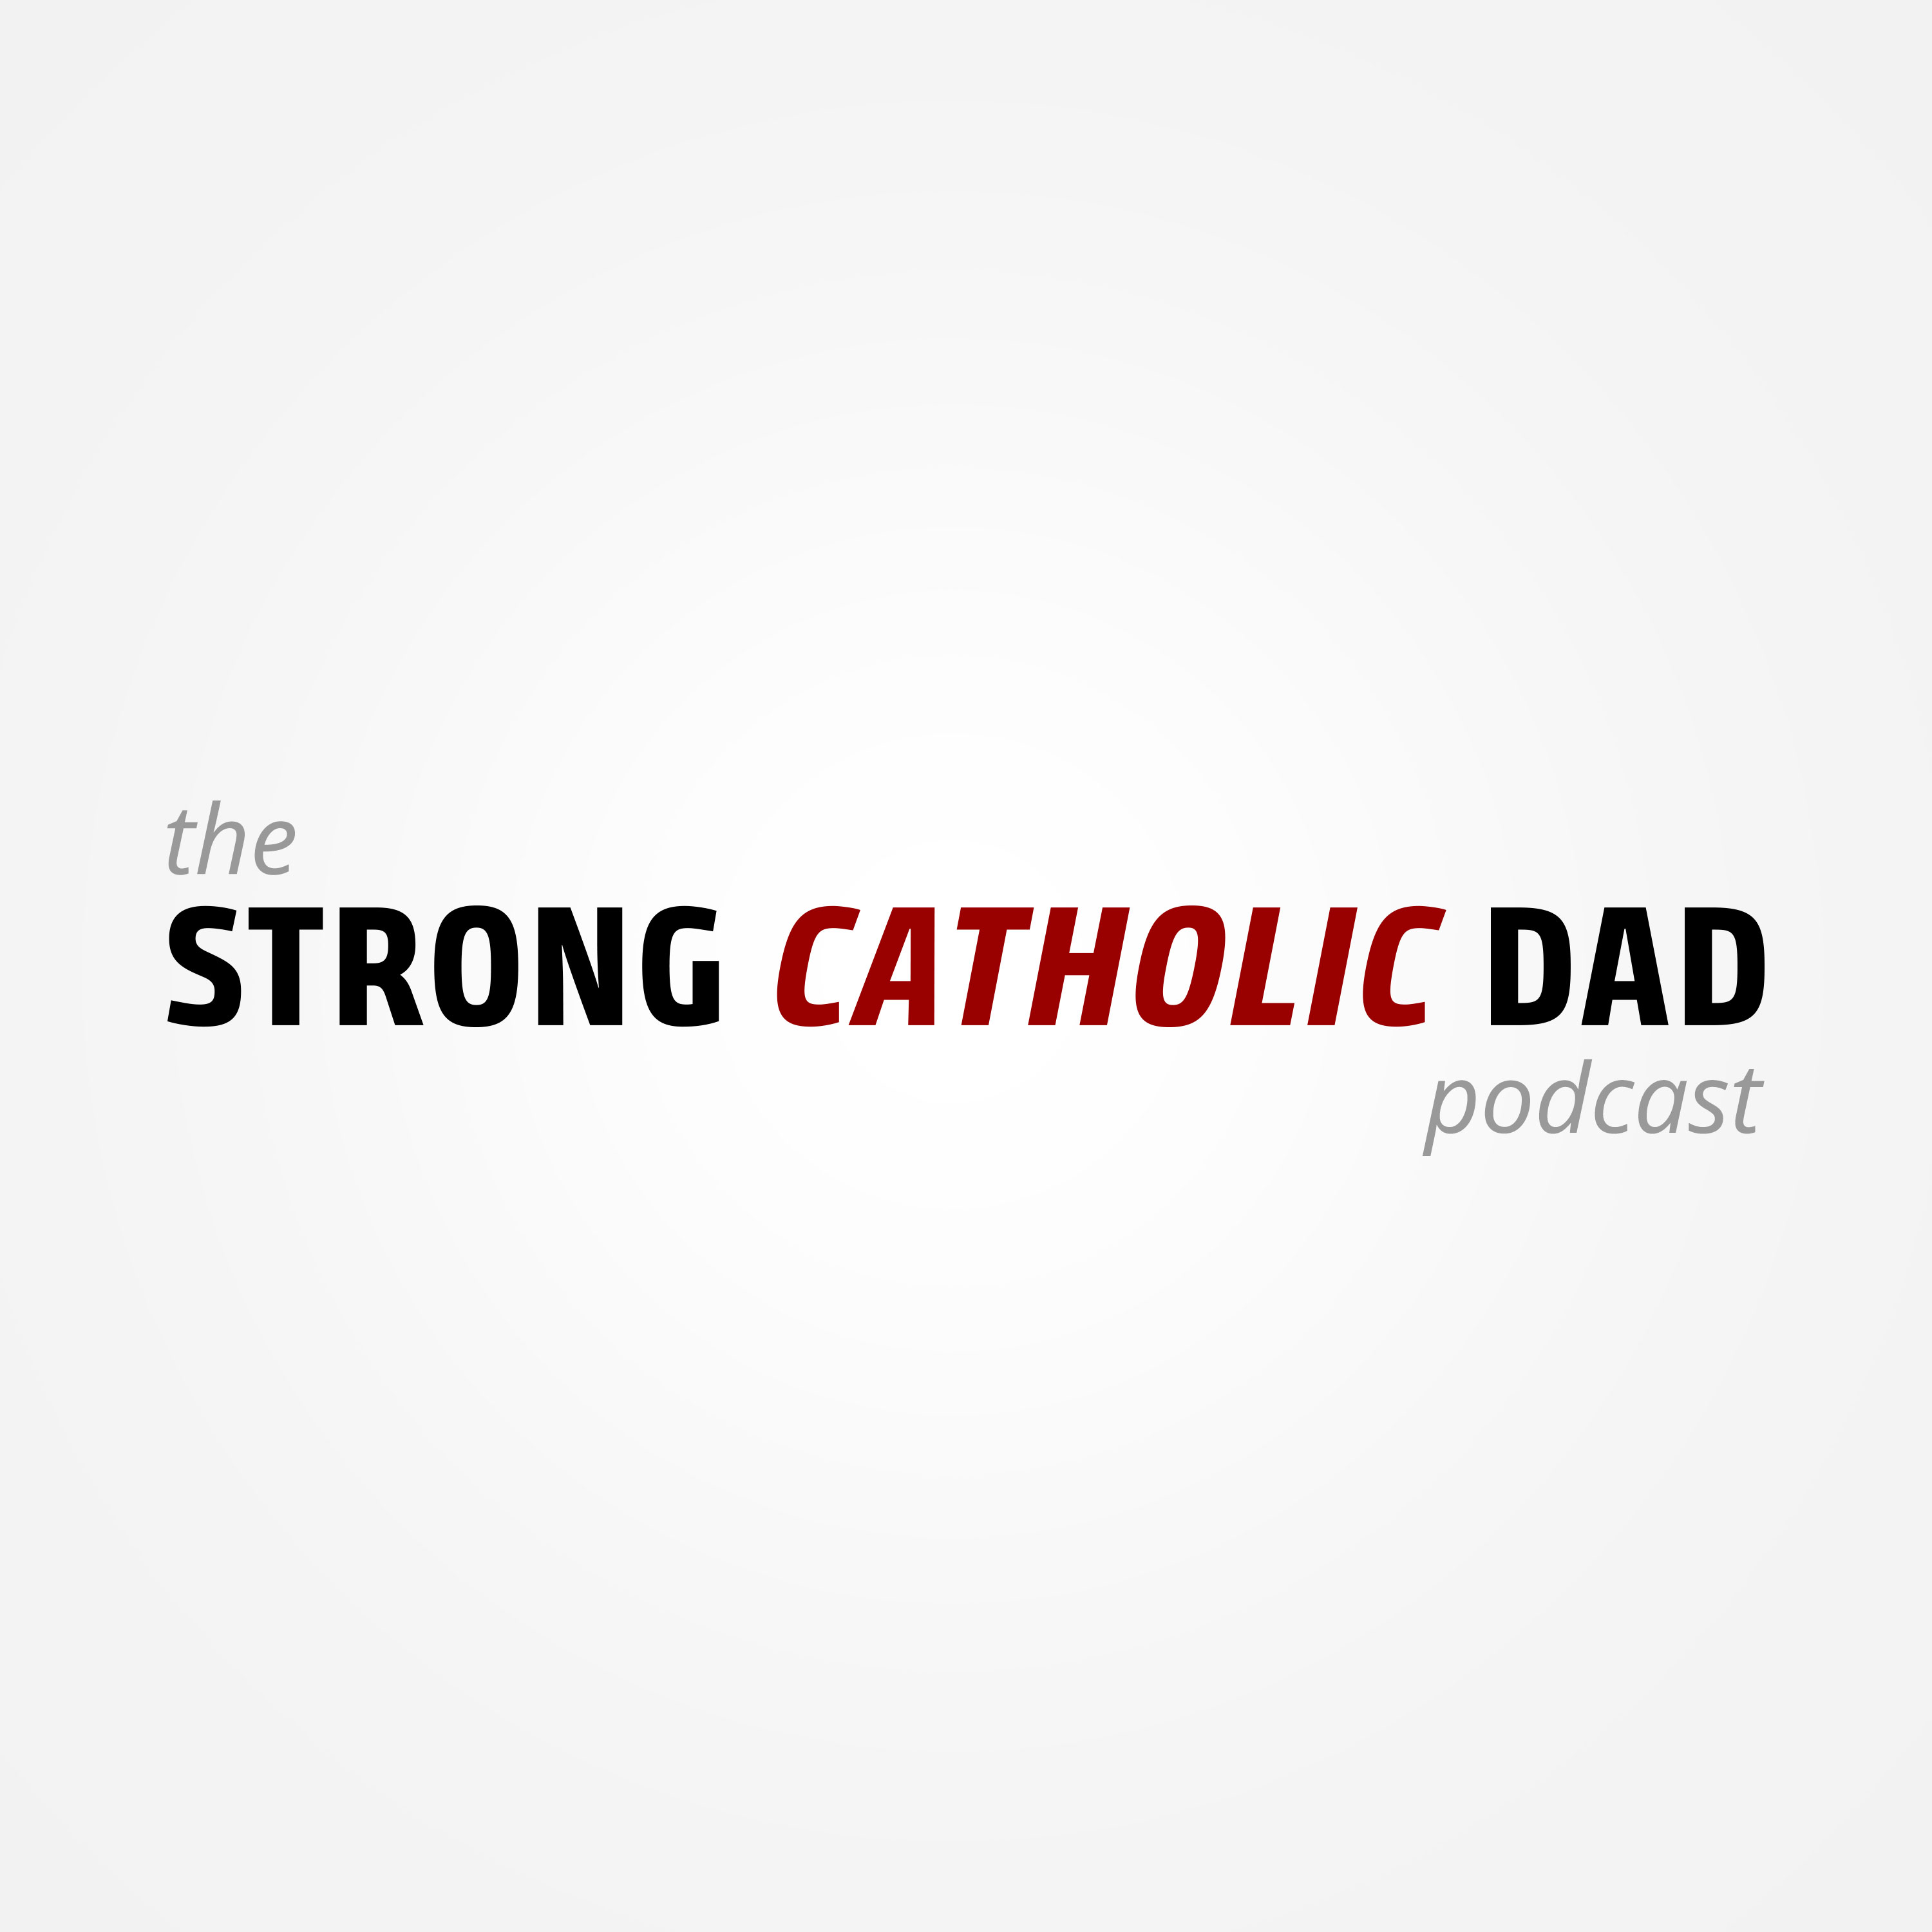 The Strong Catholic Dad Podcast